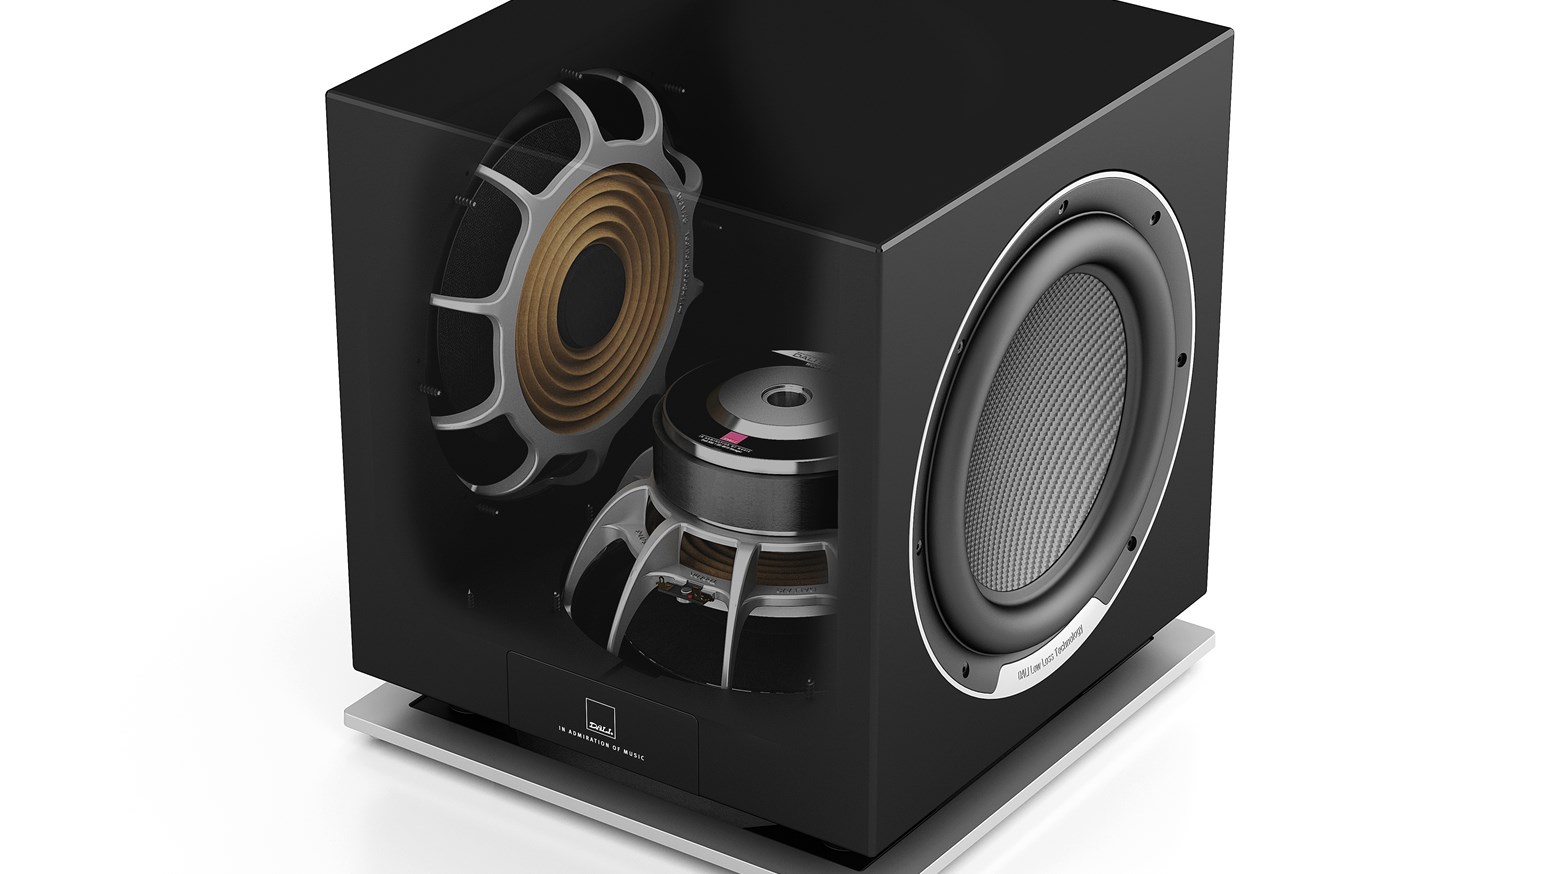 DALI SUB P-10 DSS Subwoofer for high-end stereo and home cinema systems